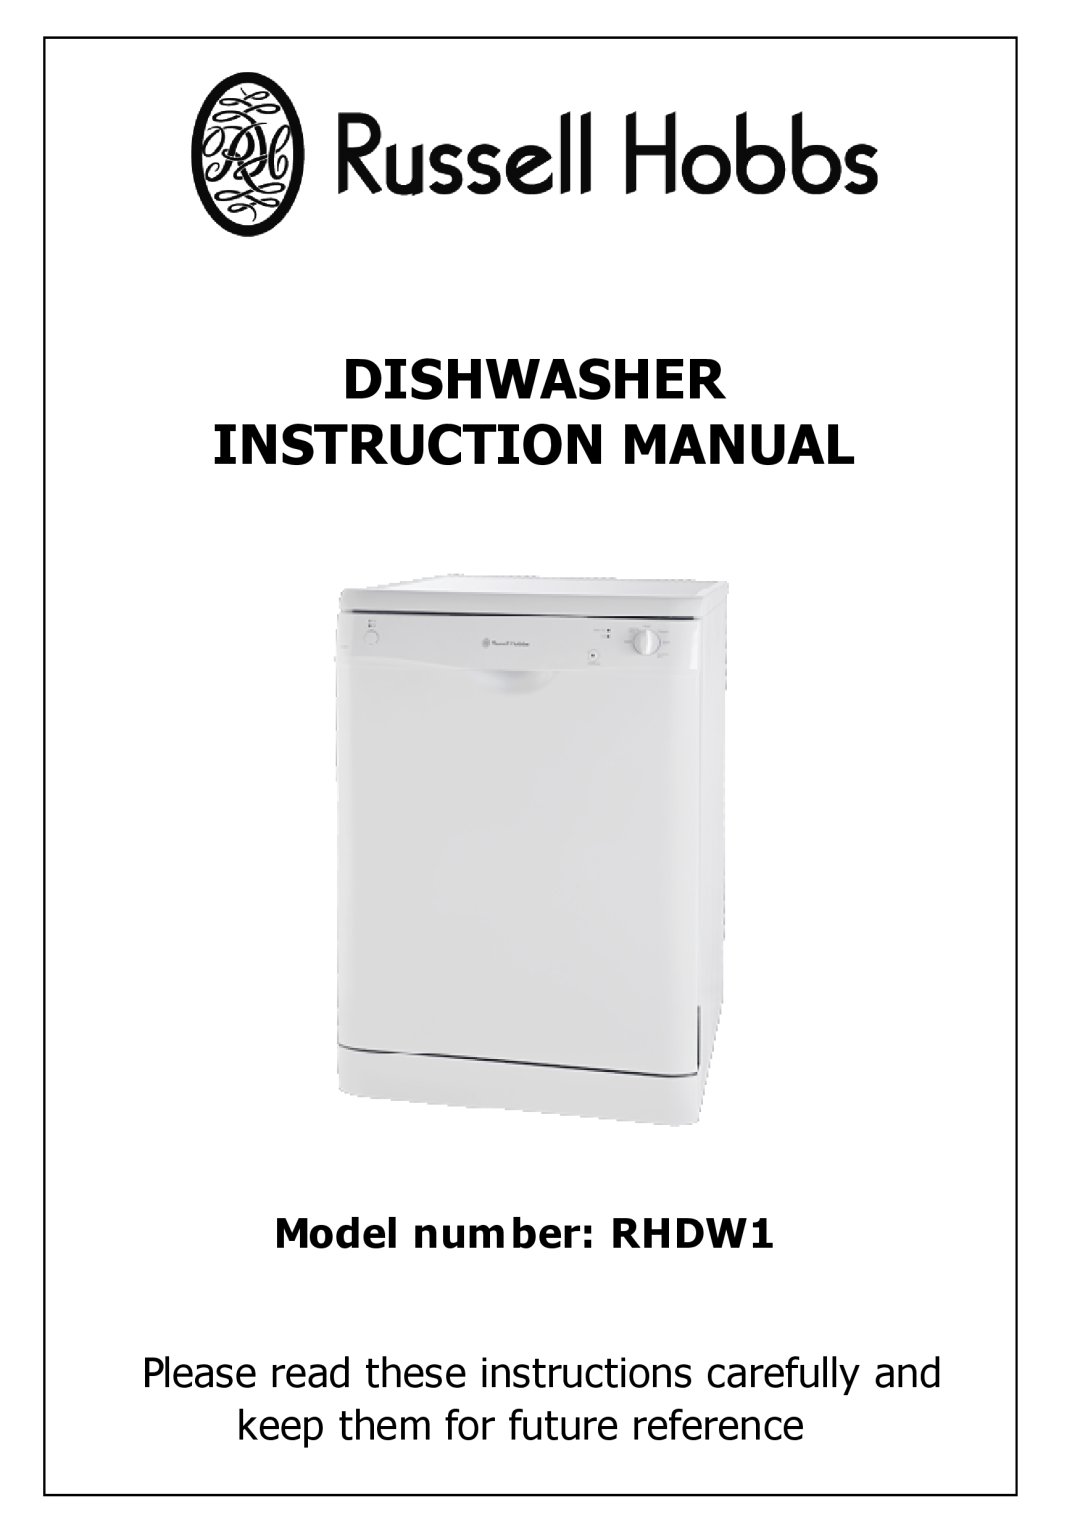 Russell Hobbs instruction manual Model number RHDW1 